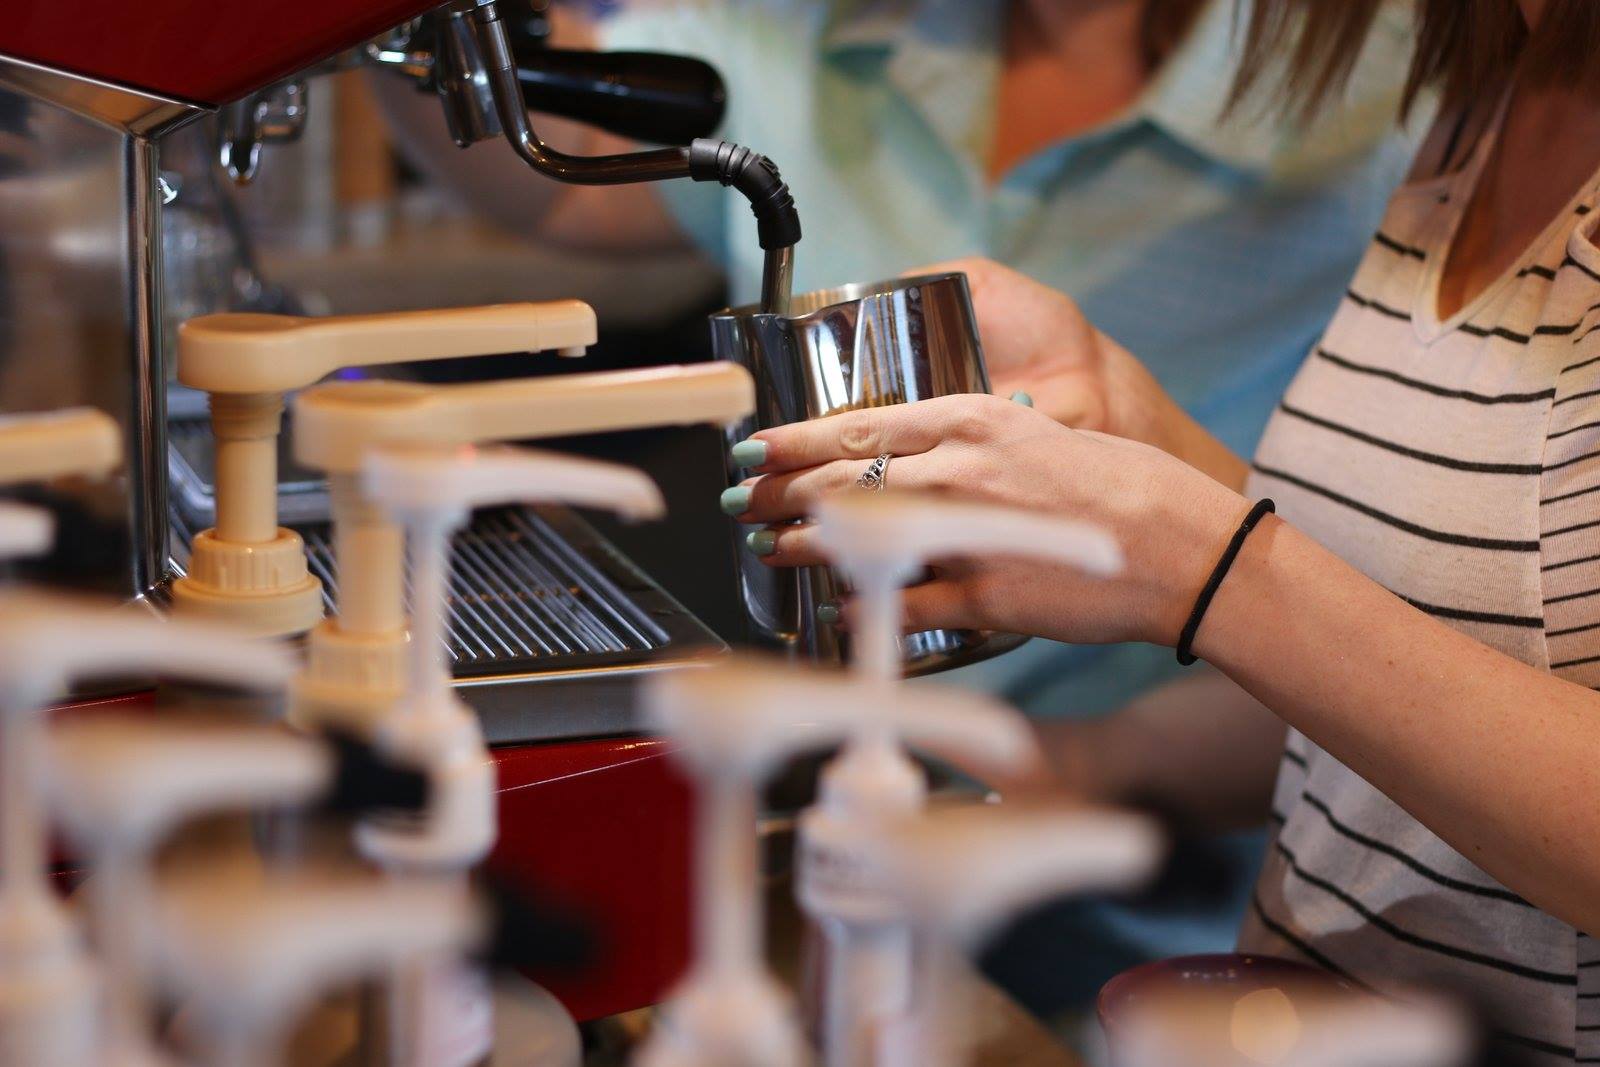 Coffee drinkers can get their coffee in the shop or delivered where they work